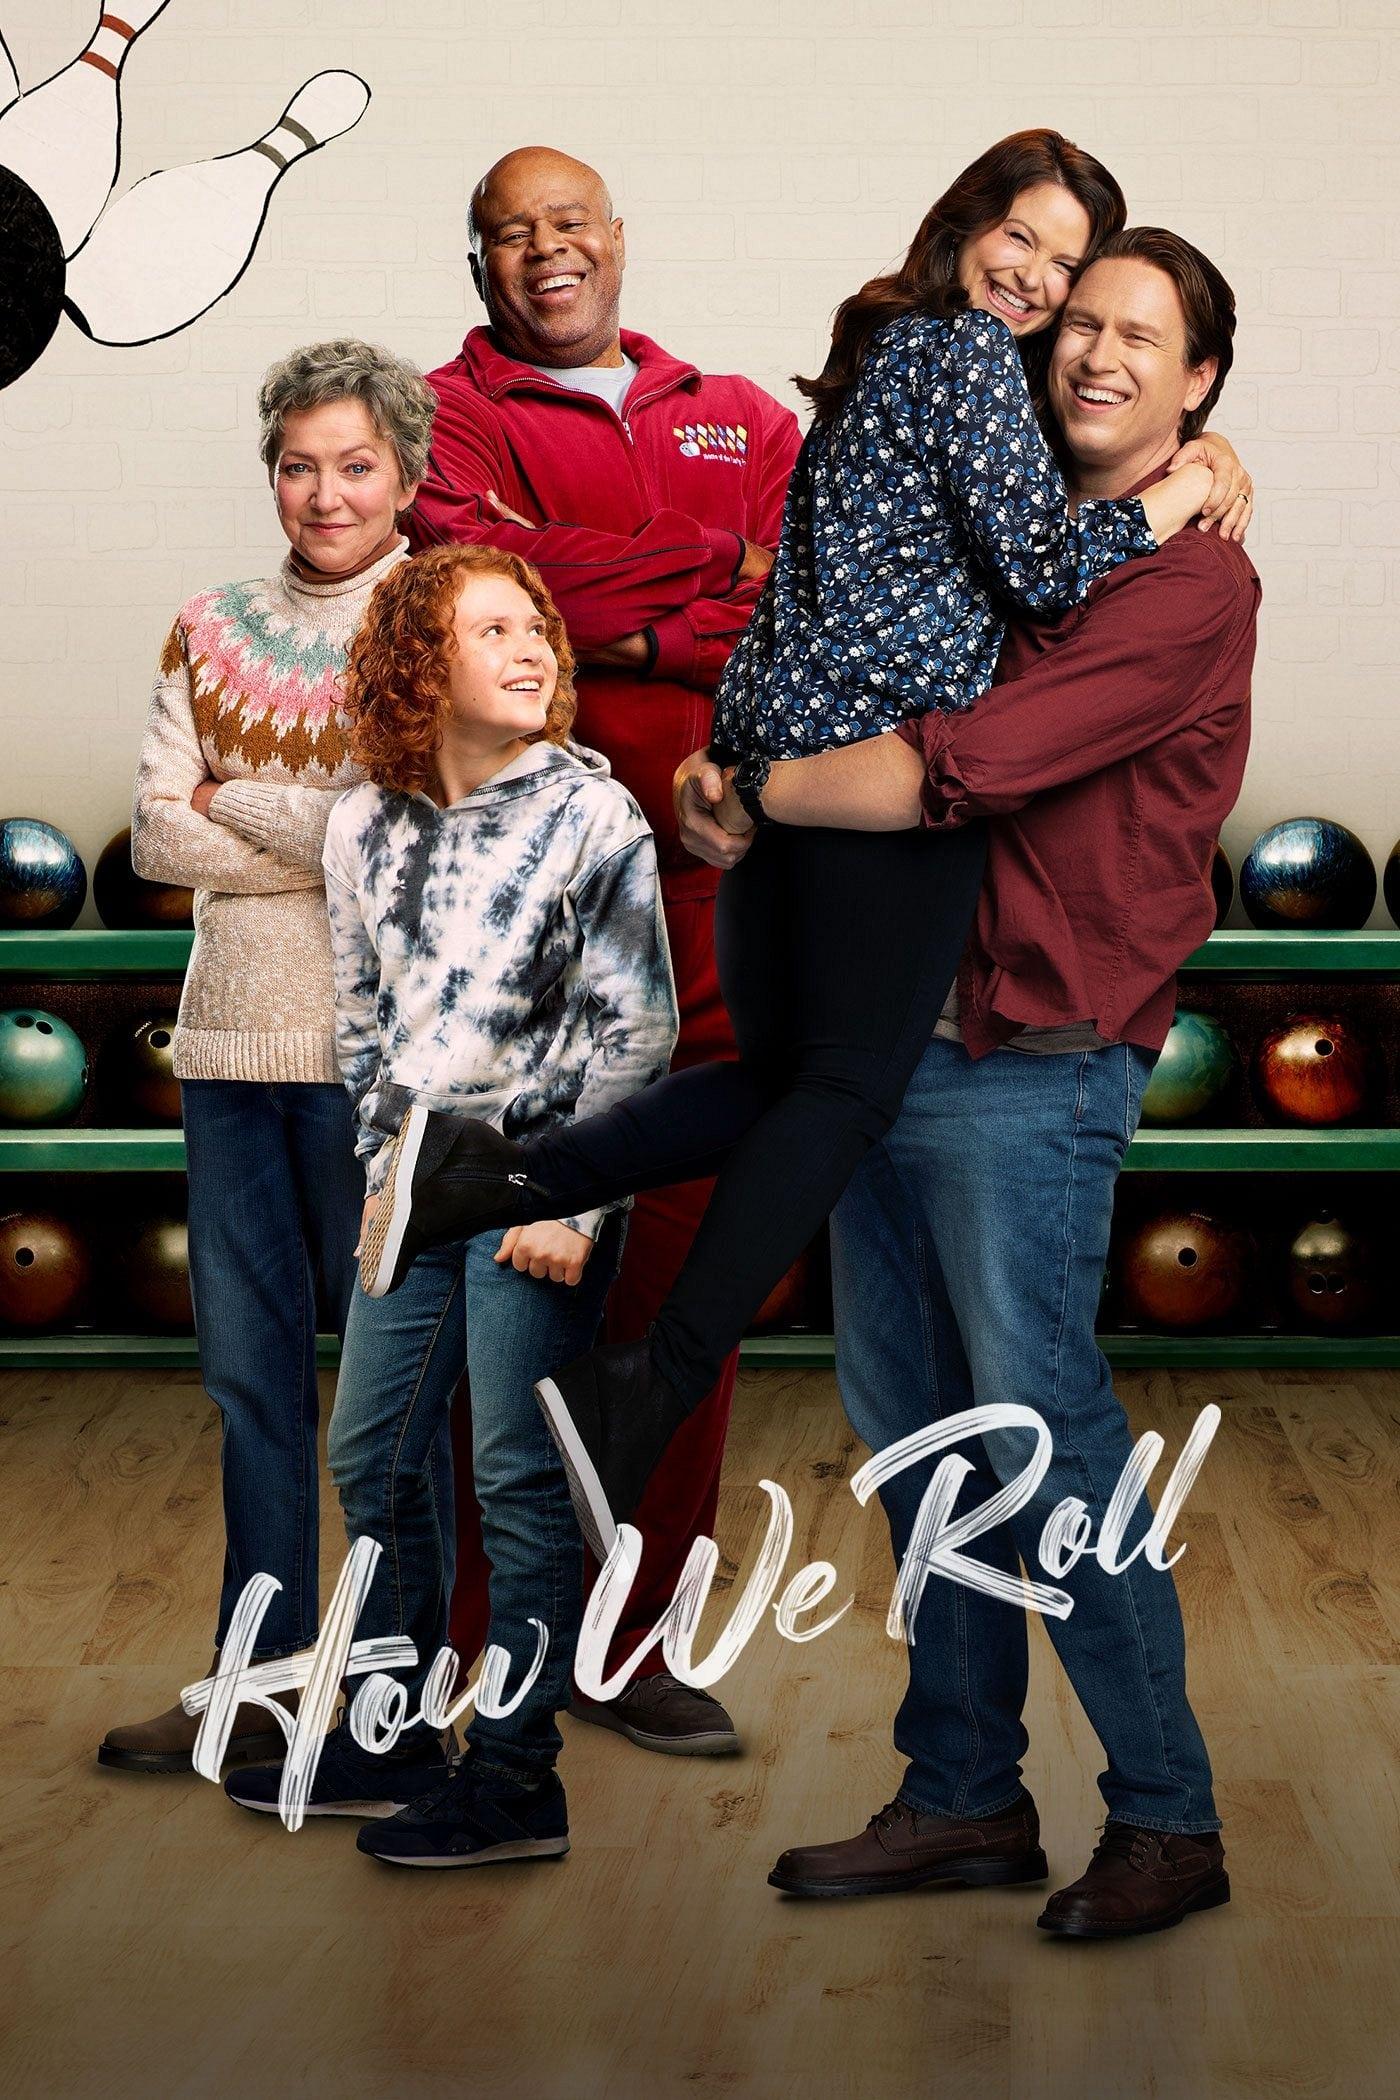 How We Roll poster